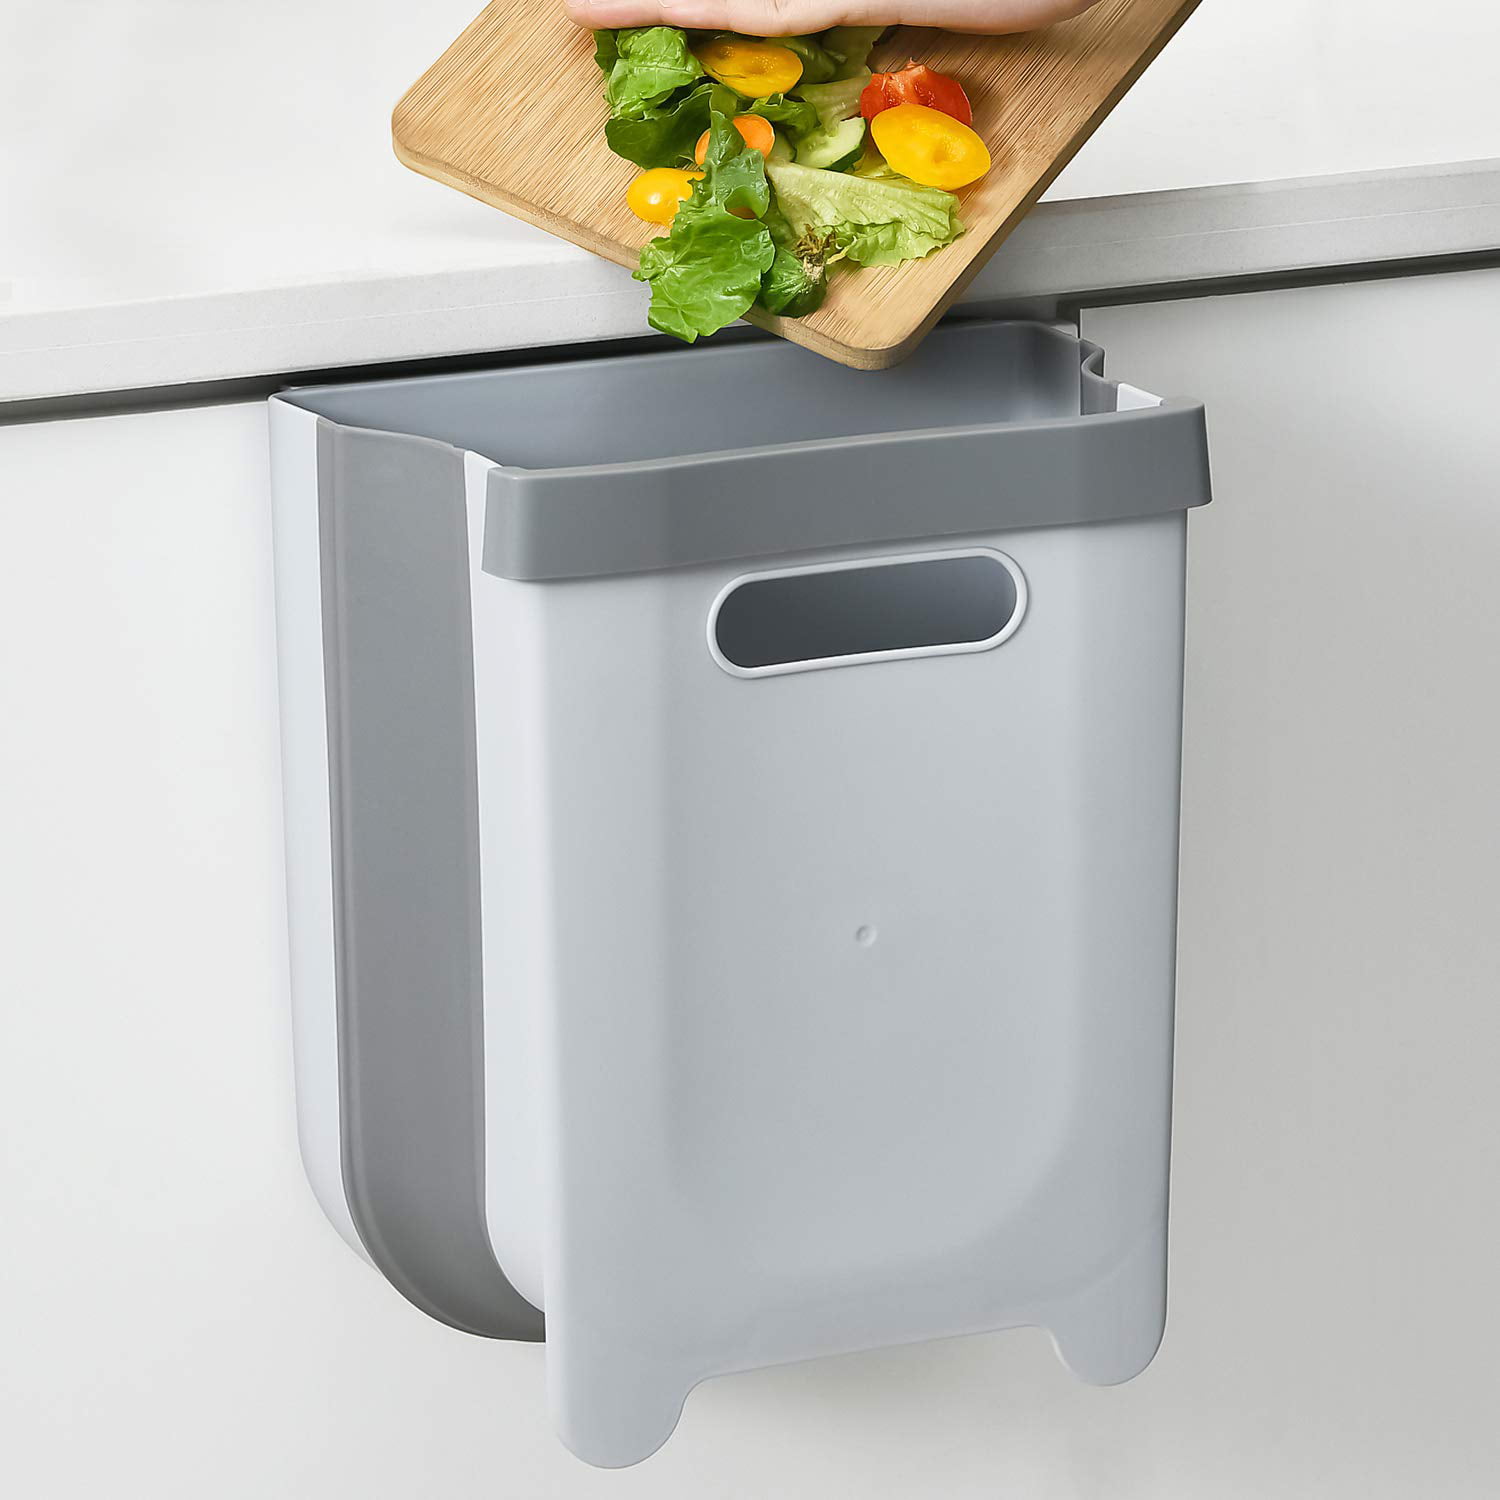 Collapsible Mini Garbage Bin For Cabine Subekyu Small Hanging Kitchen Trash Can 